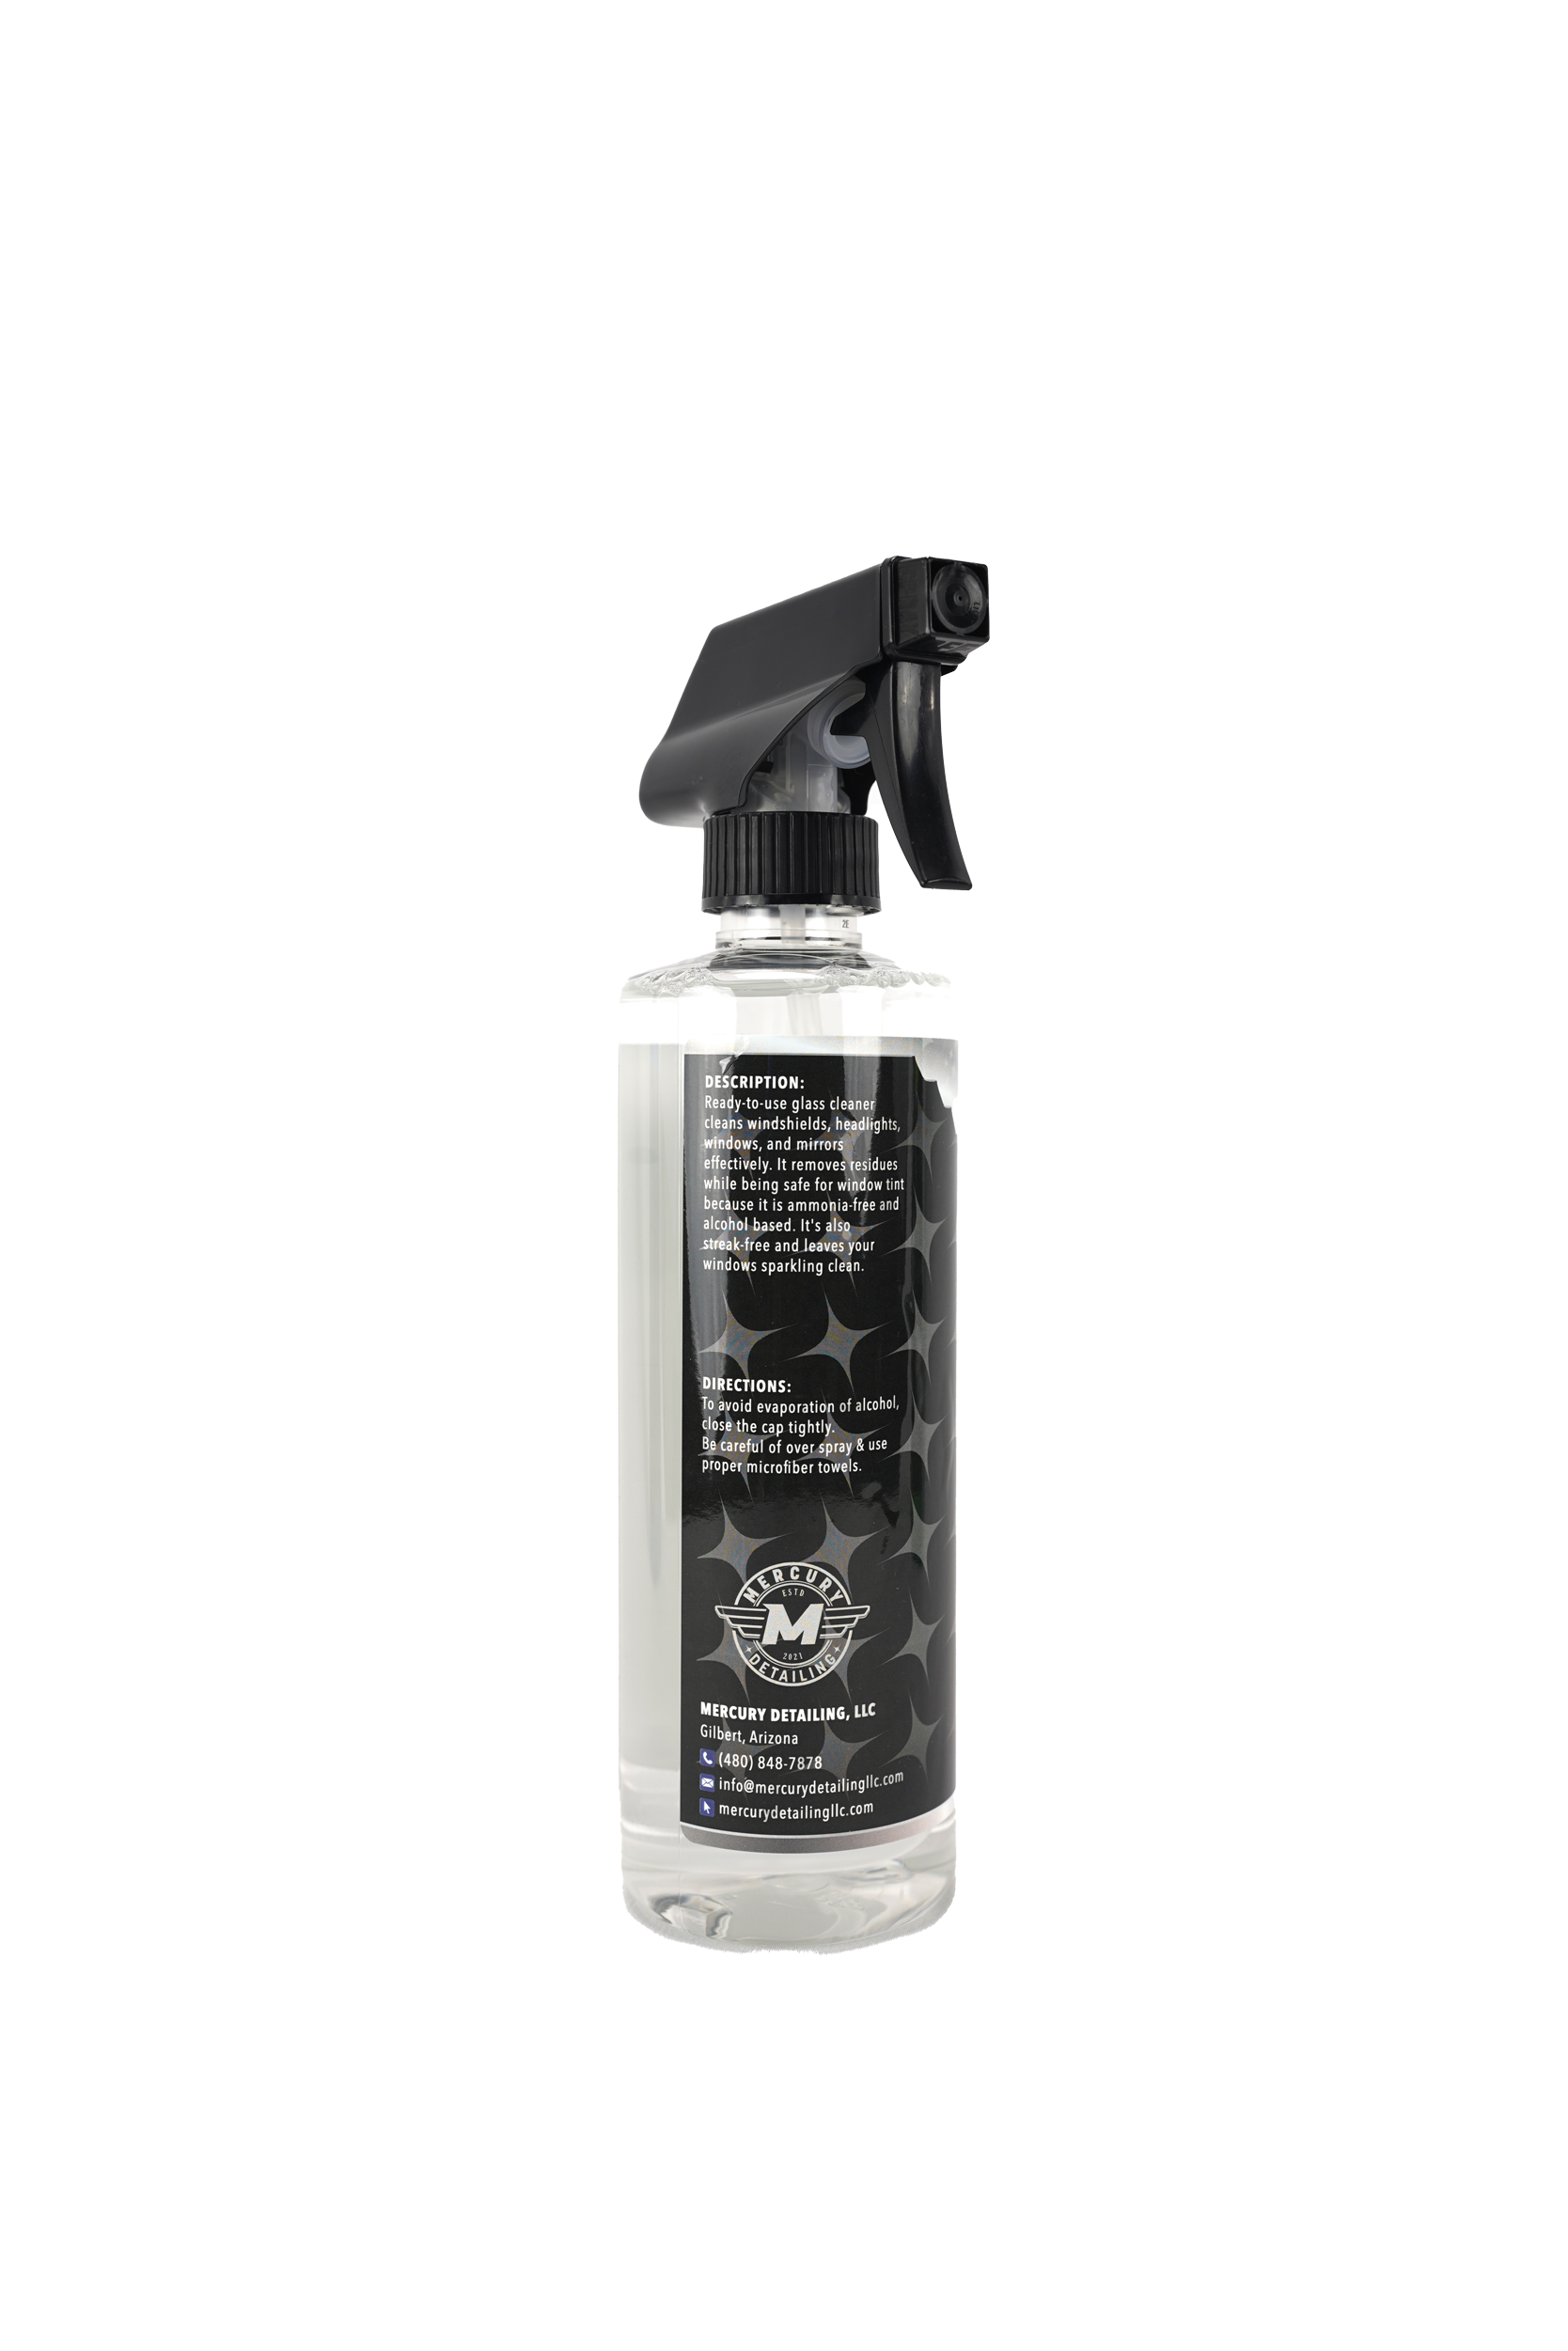 ExoForma Glass Cleaner 16 oz (New SiO2 Formula) - Easy to Use and Leaves Behind A Streak Free, Crystal Clear Finish! (Ammonia Free - Safe on Window